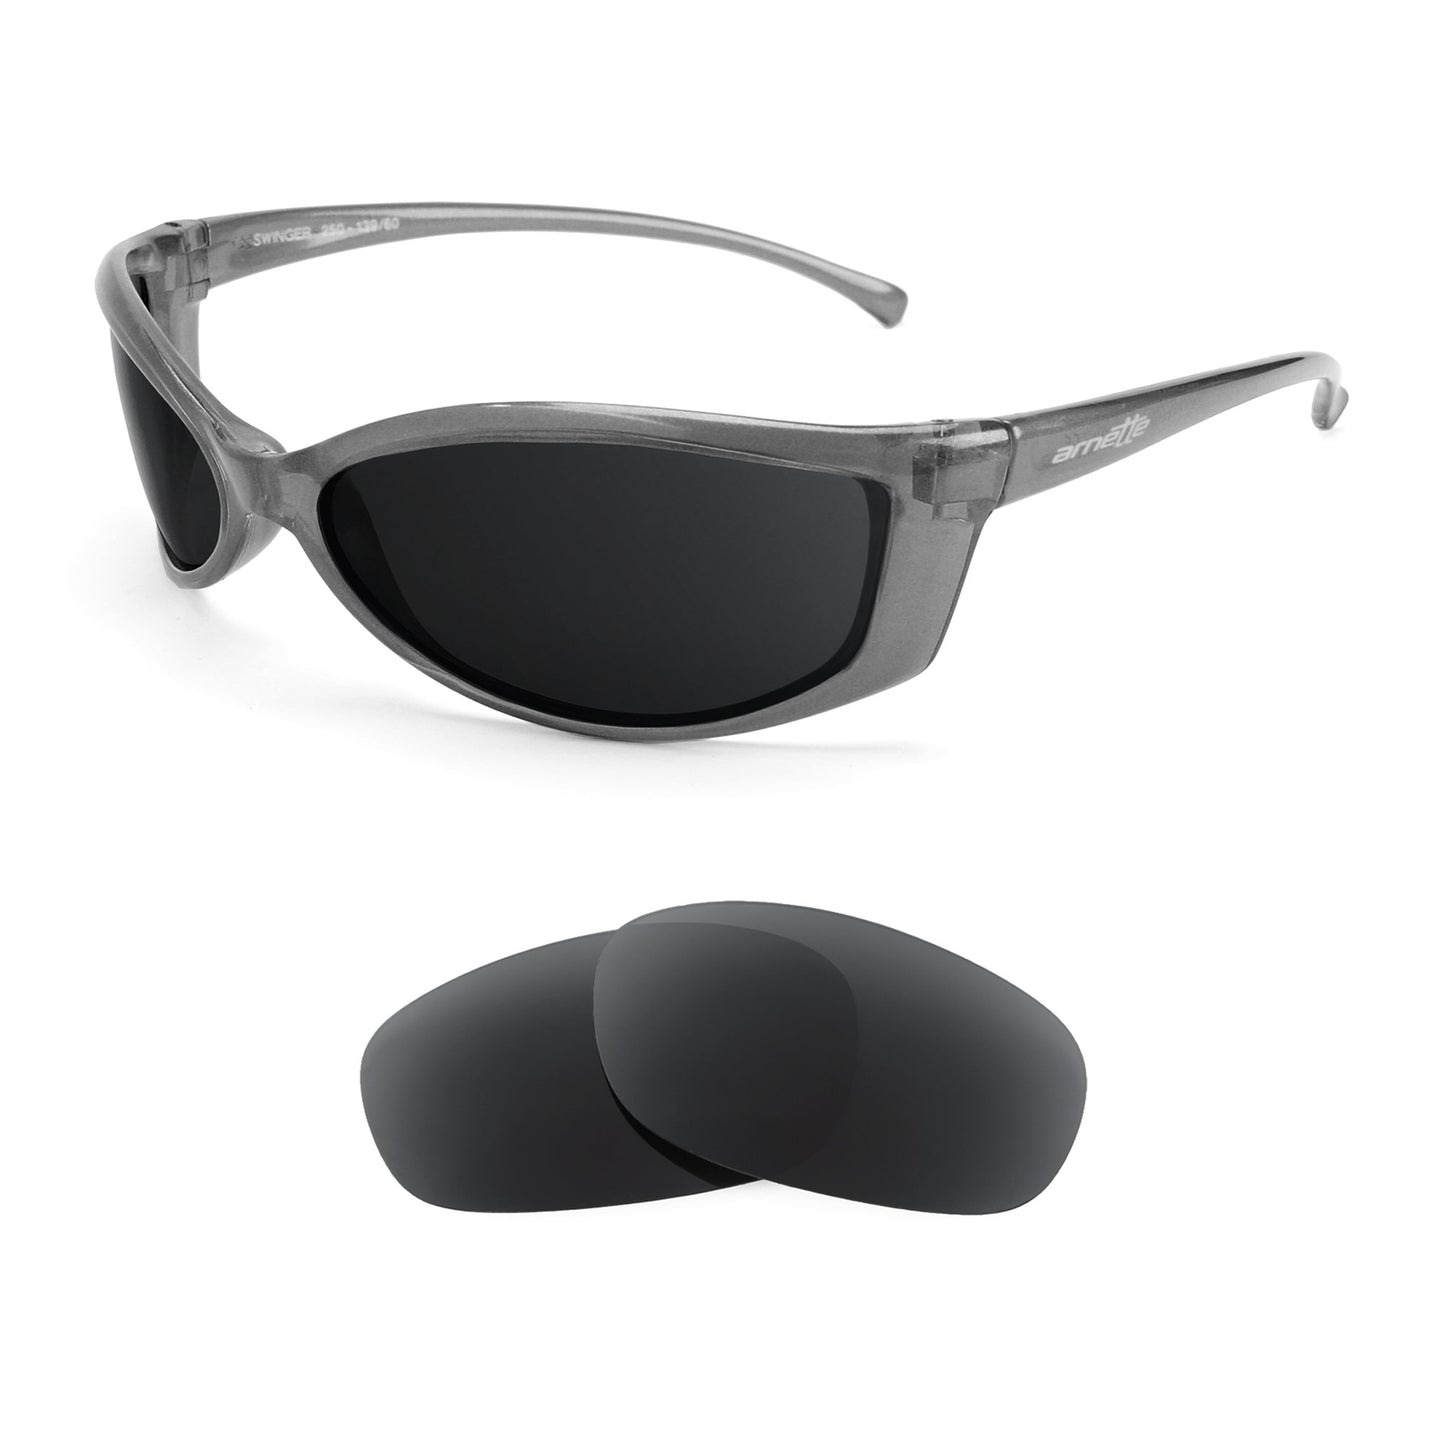 Arnette Swinger AN250 sunglasses with replacement lenses